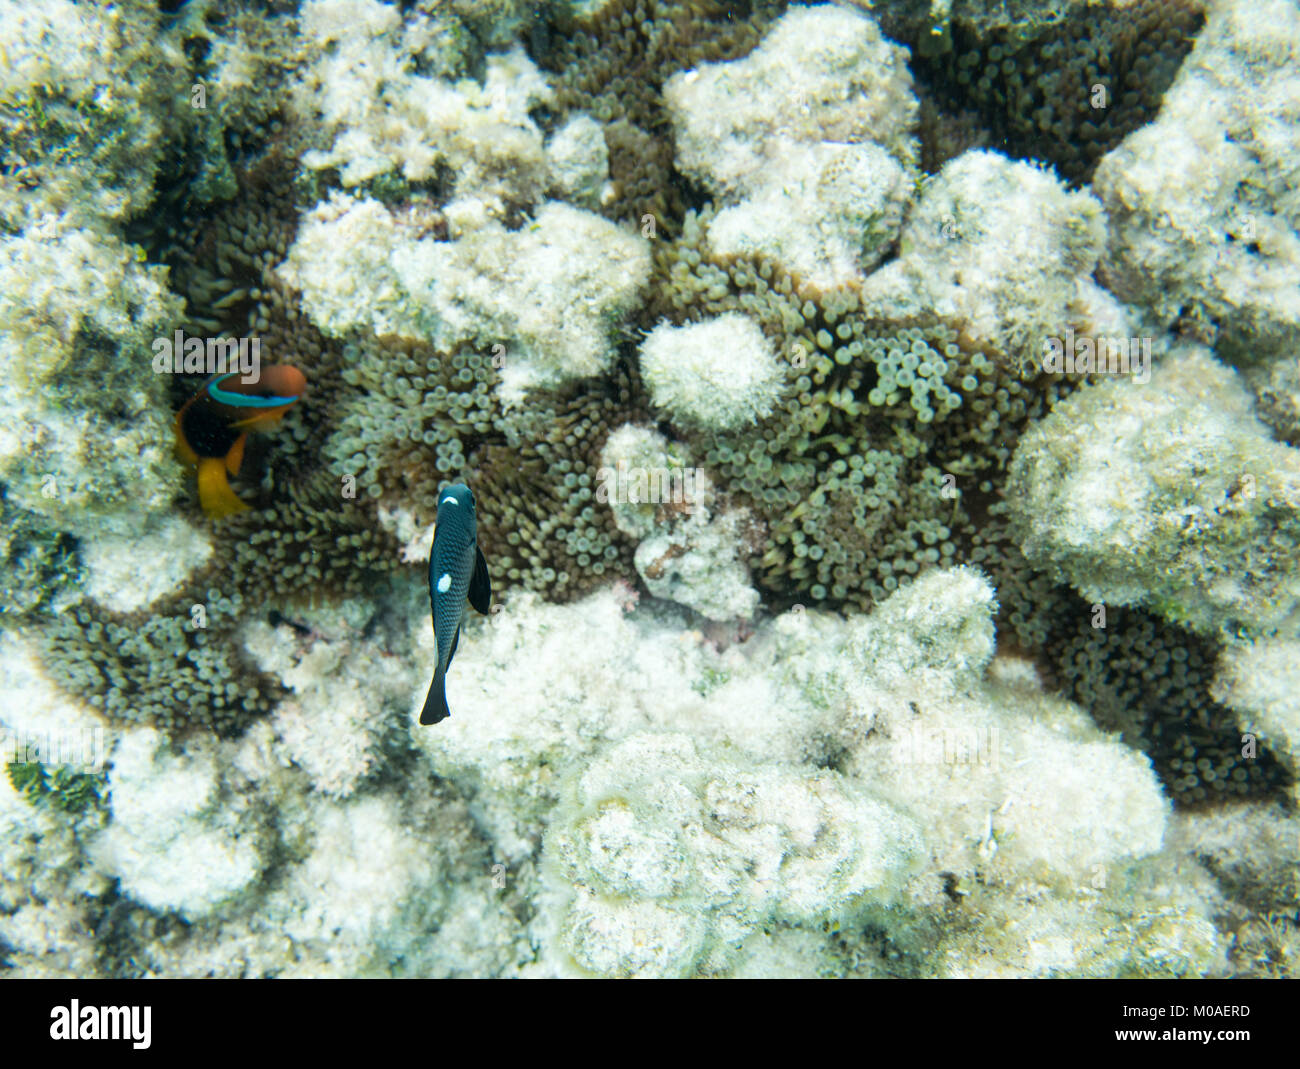 Clown fish and domino damsel in the stunning coral reef ecosystem off the coast of Yejele Beach in Tadine, Mare, New Caledonia Stock Photo